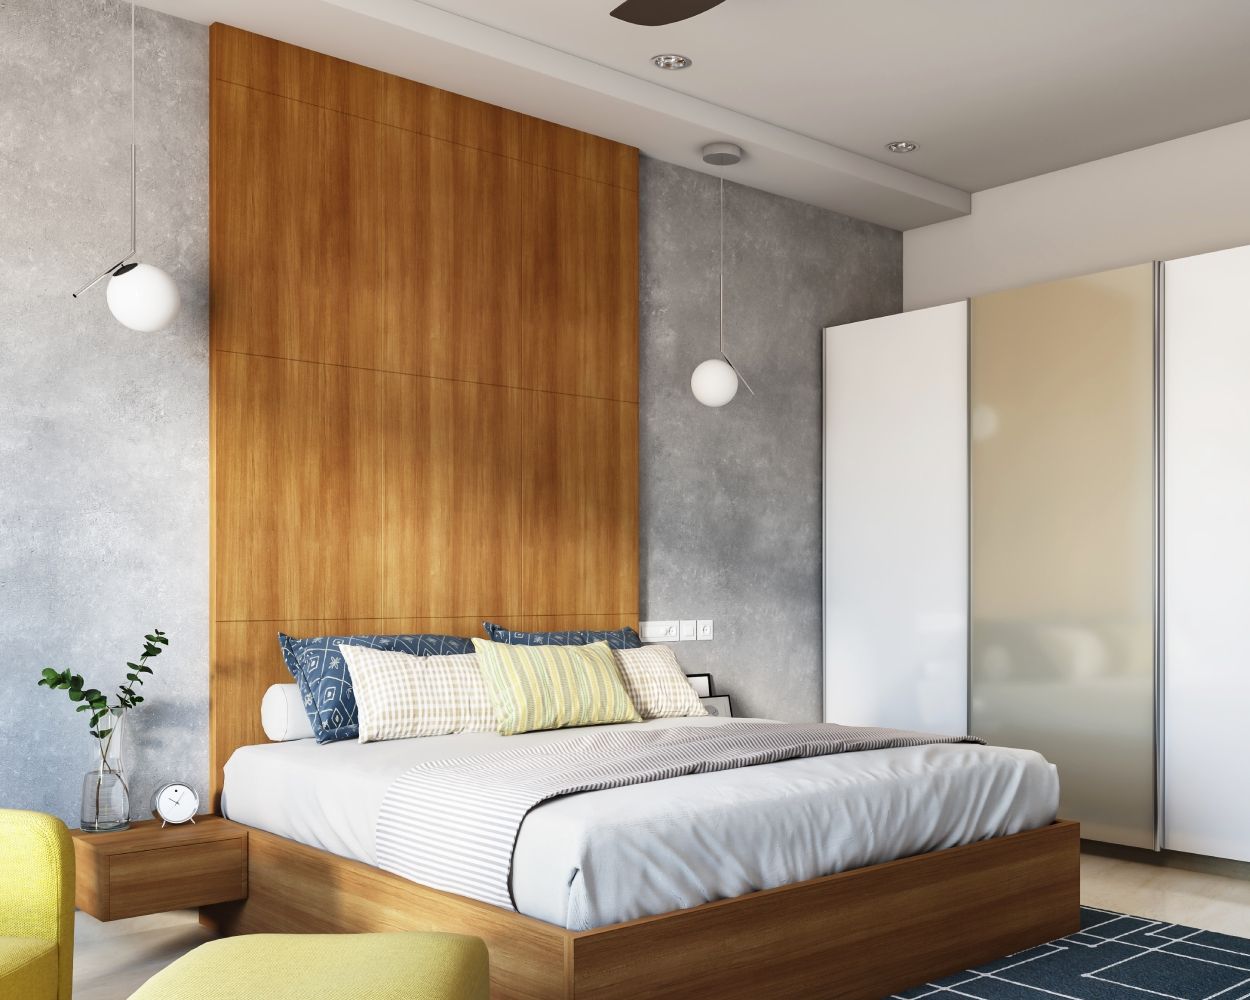 Modern Bedroom Wall Design With Grey Textured Wall And Vertical Wooden Panel